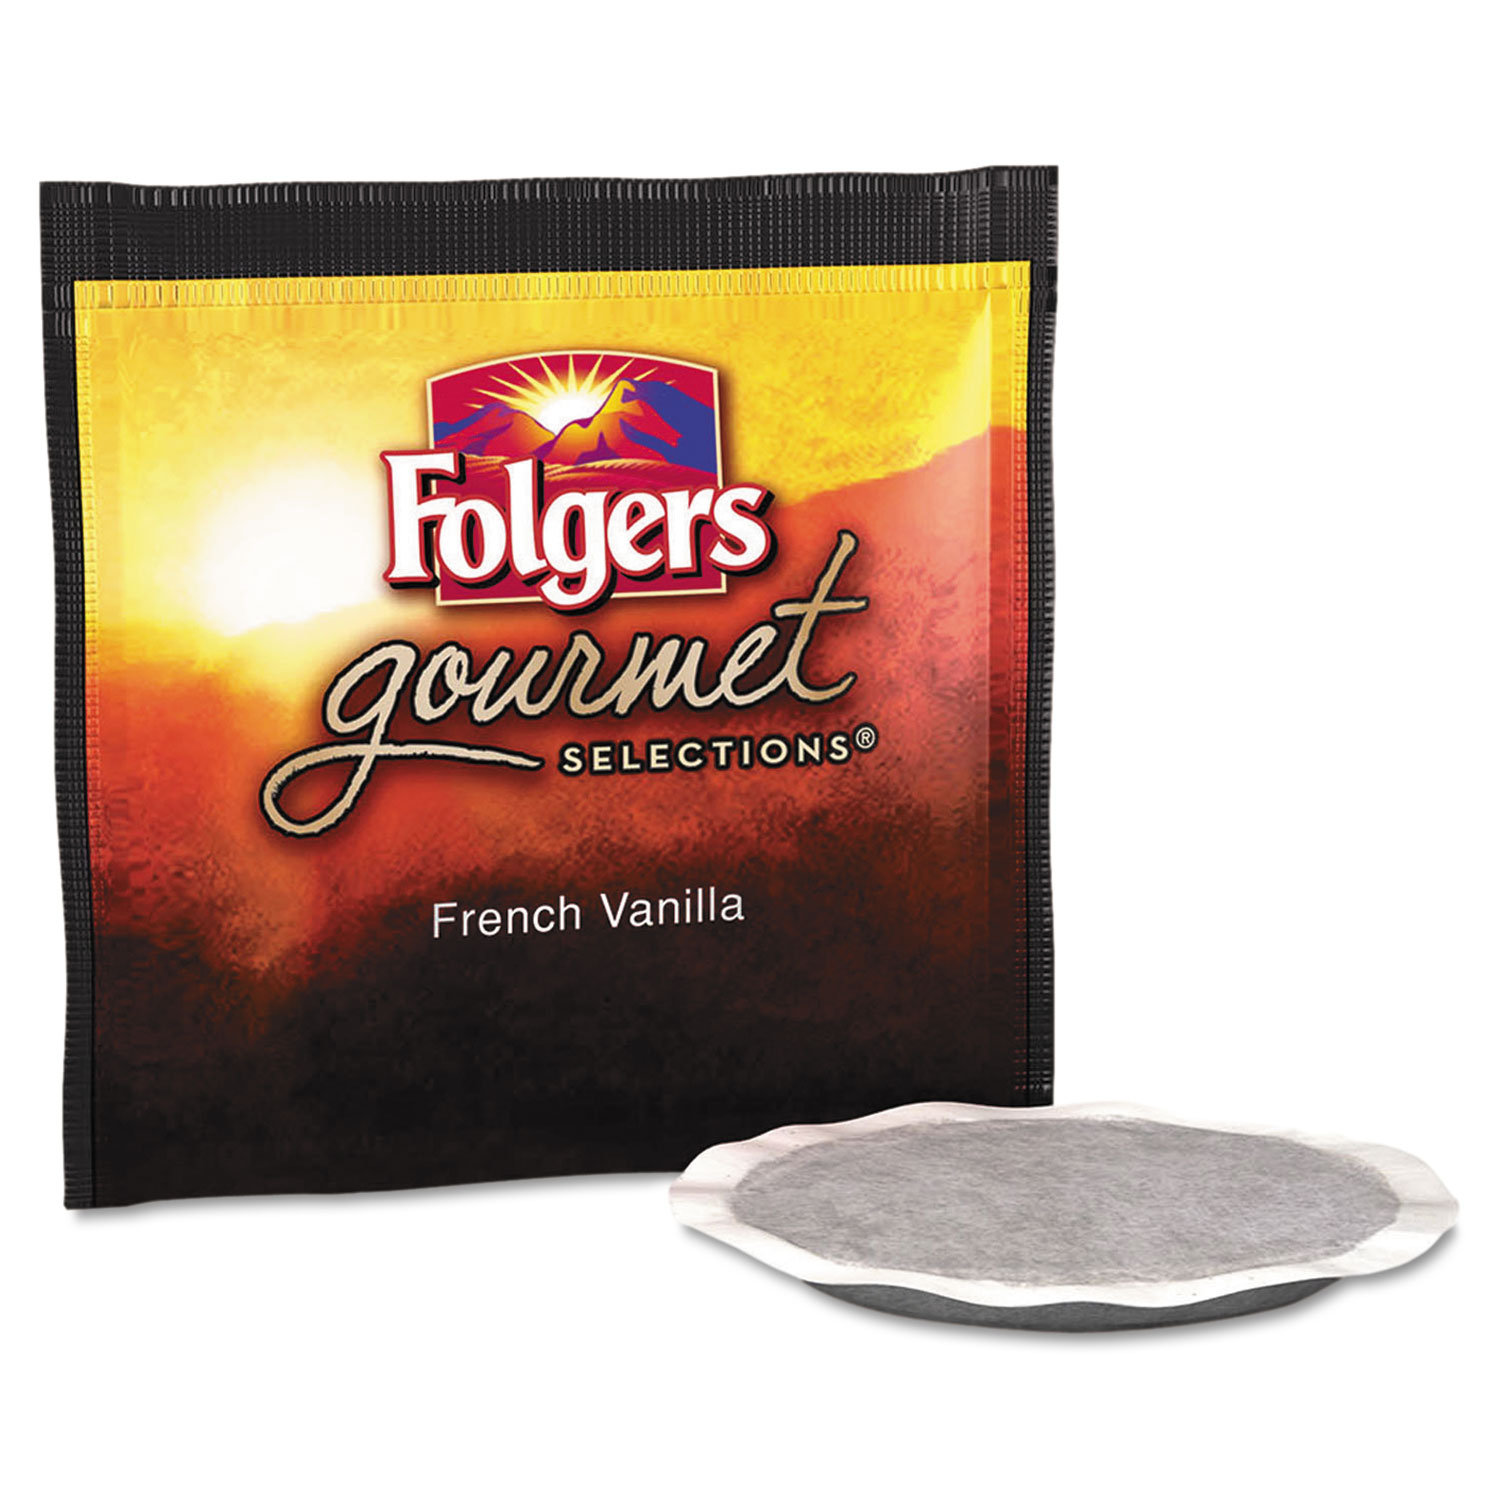  Folgers 2550063102 Gourmet Selections Coffee Pods, French Vanilla, 18/Box (FOL63102) 